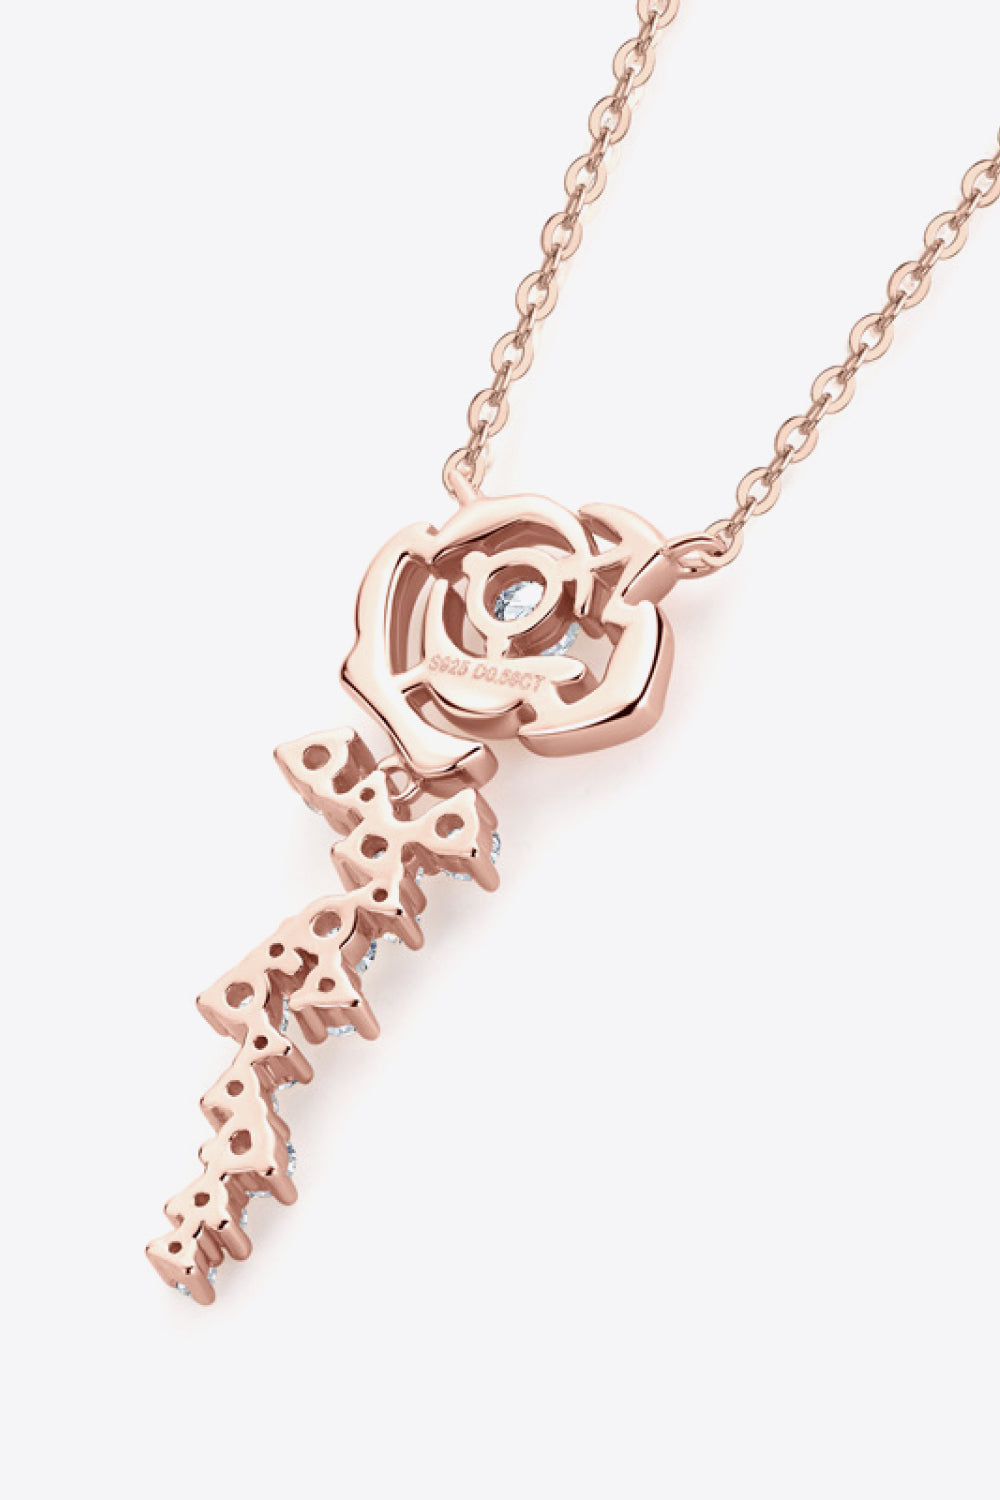 The Rose Gold Necklace